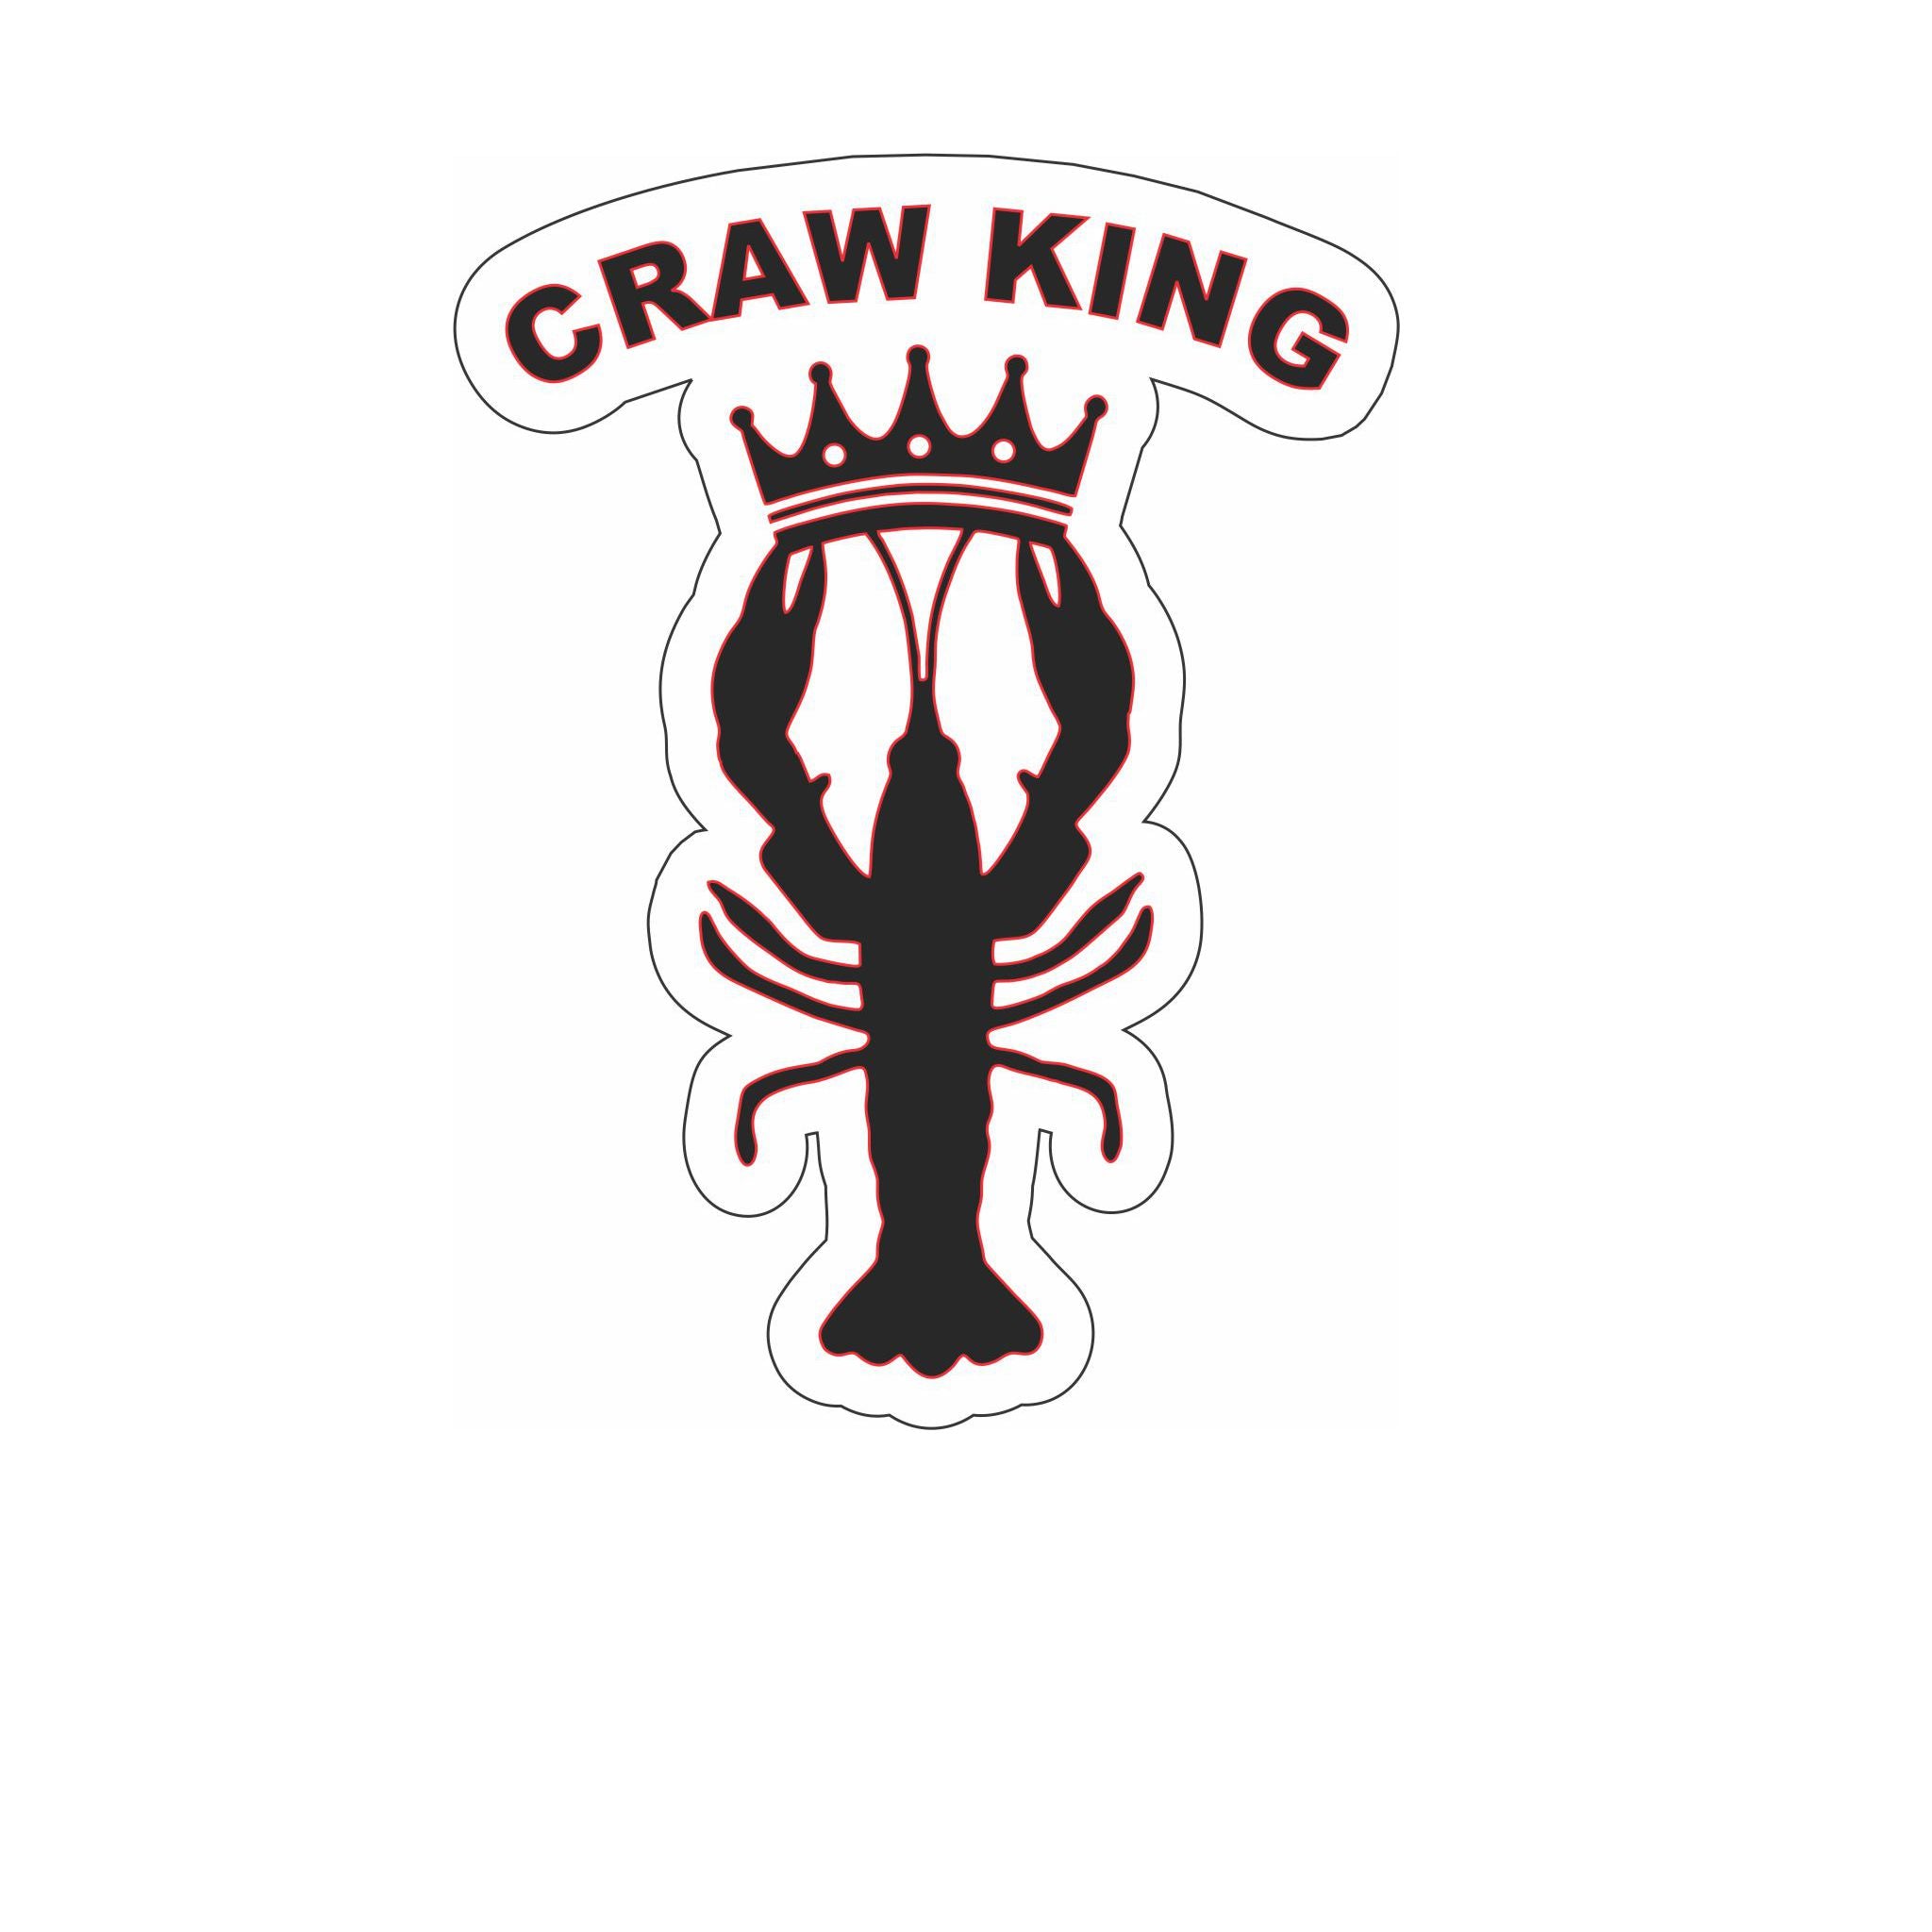 Craw King Printed Decal Black/Red Outline